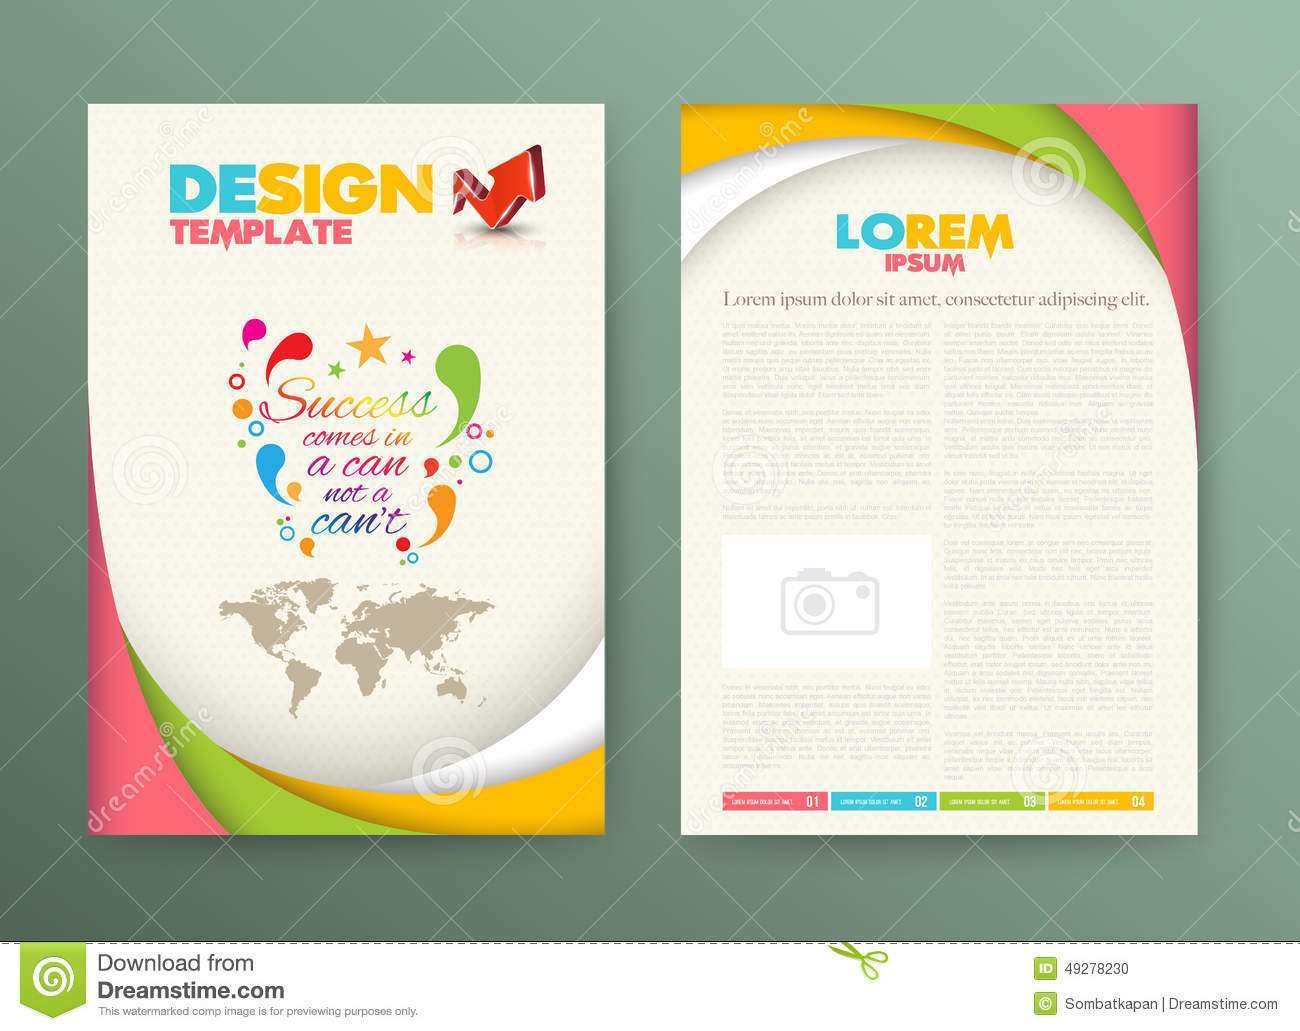 29 Standard Flyers Design Templates Free in Word by Flyers Design Templates Free